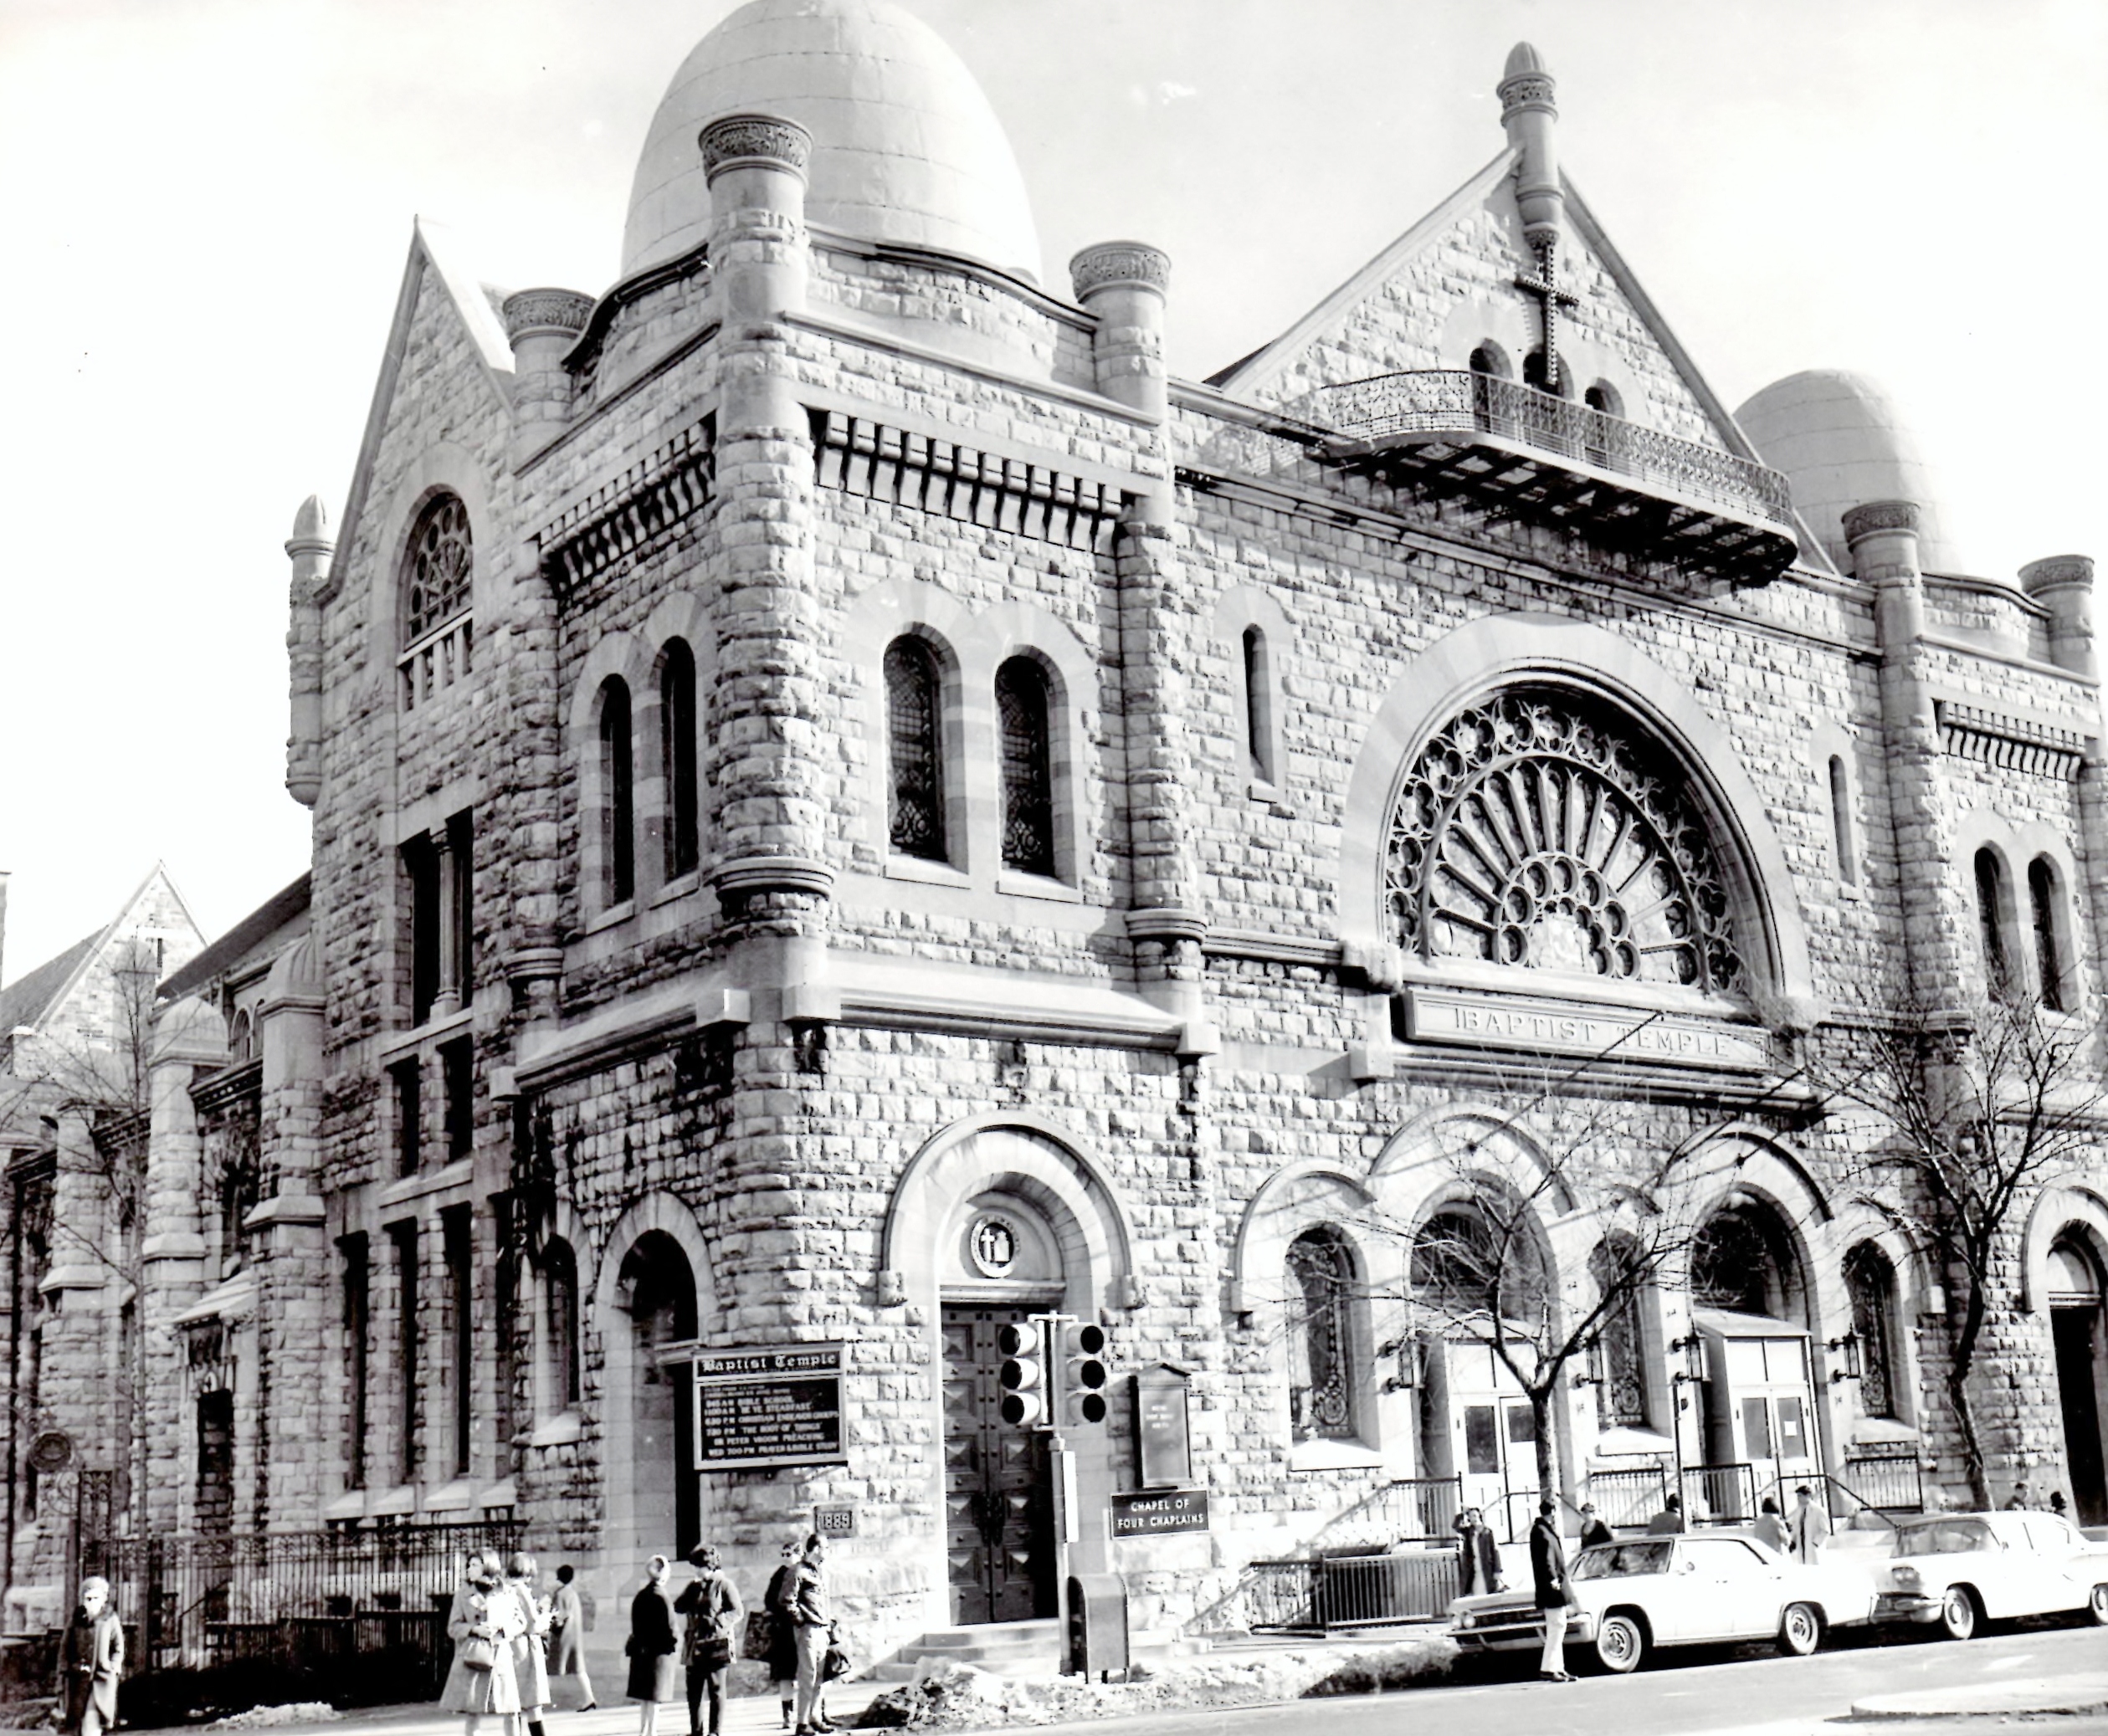 The Chapel of the Four Chaplains on North Broad Street in Philadelphia, Pennsylvania. 